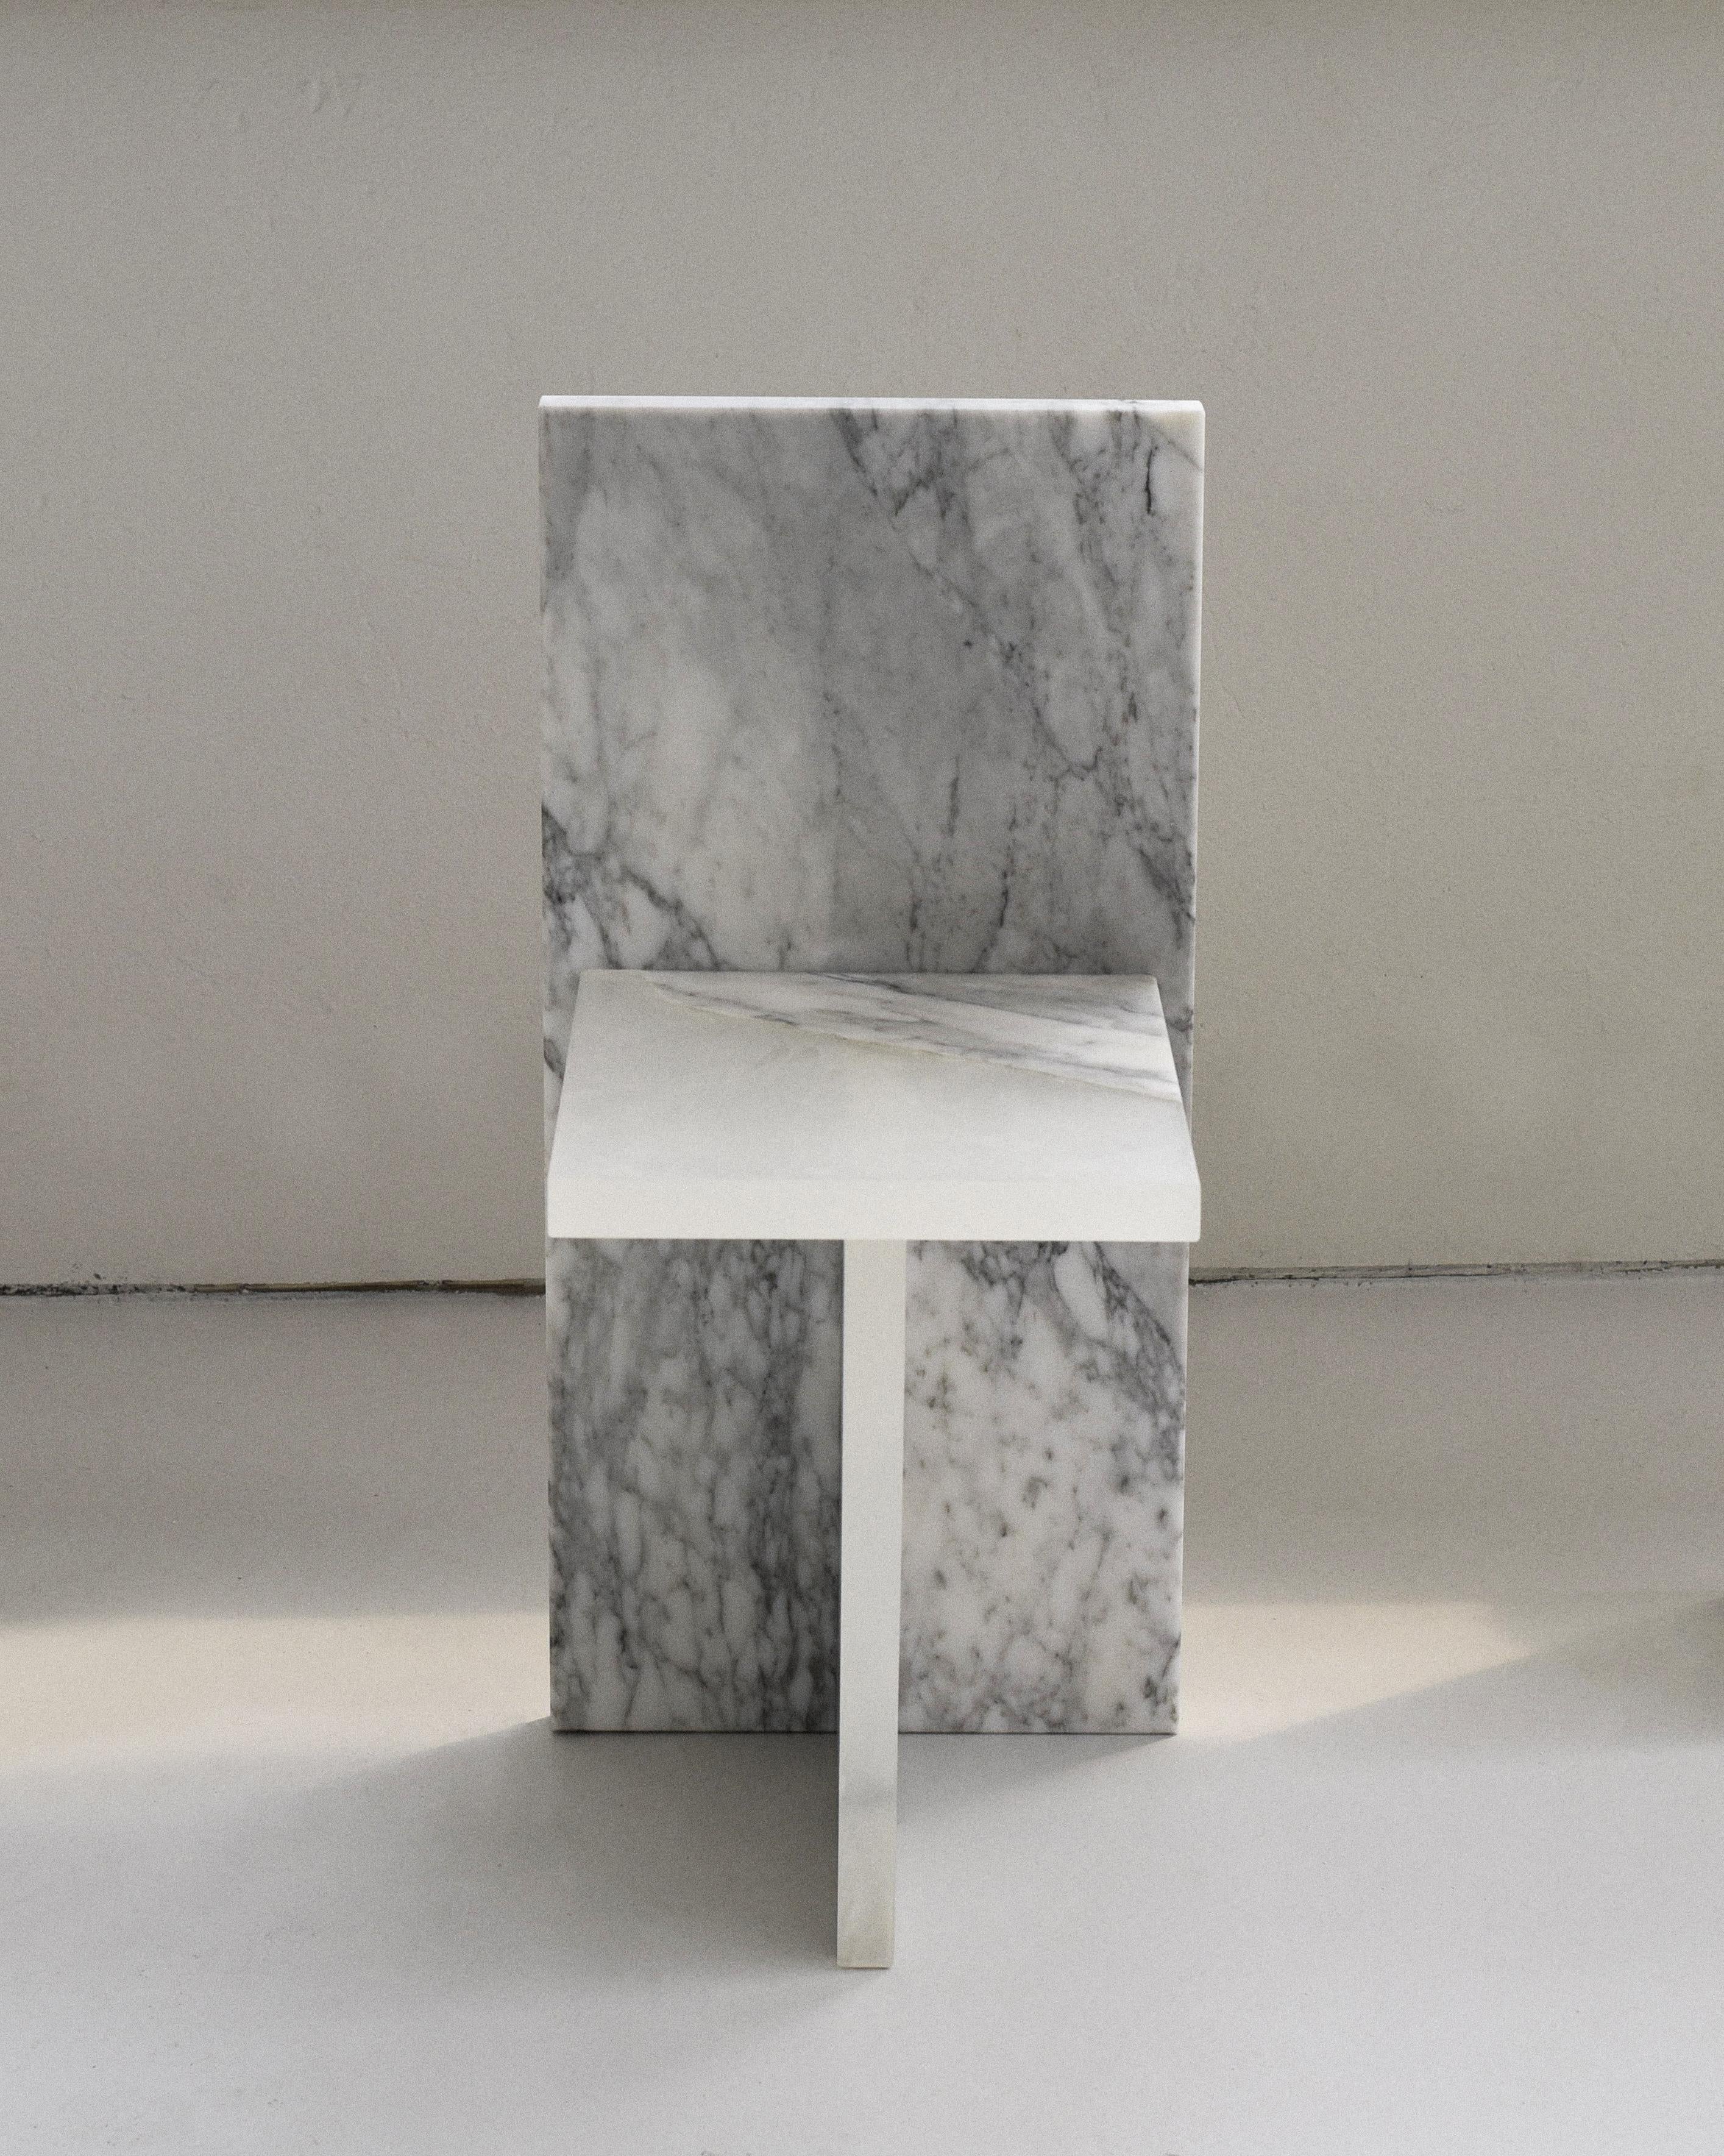 Organic Modern White Crystal Resin and Marble, Fragment Chair, Jang Hea Kyoung